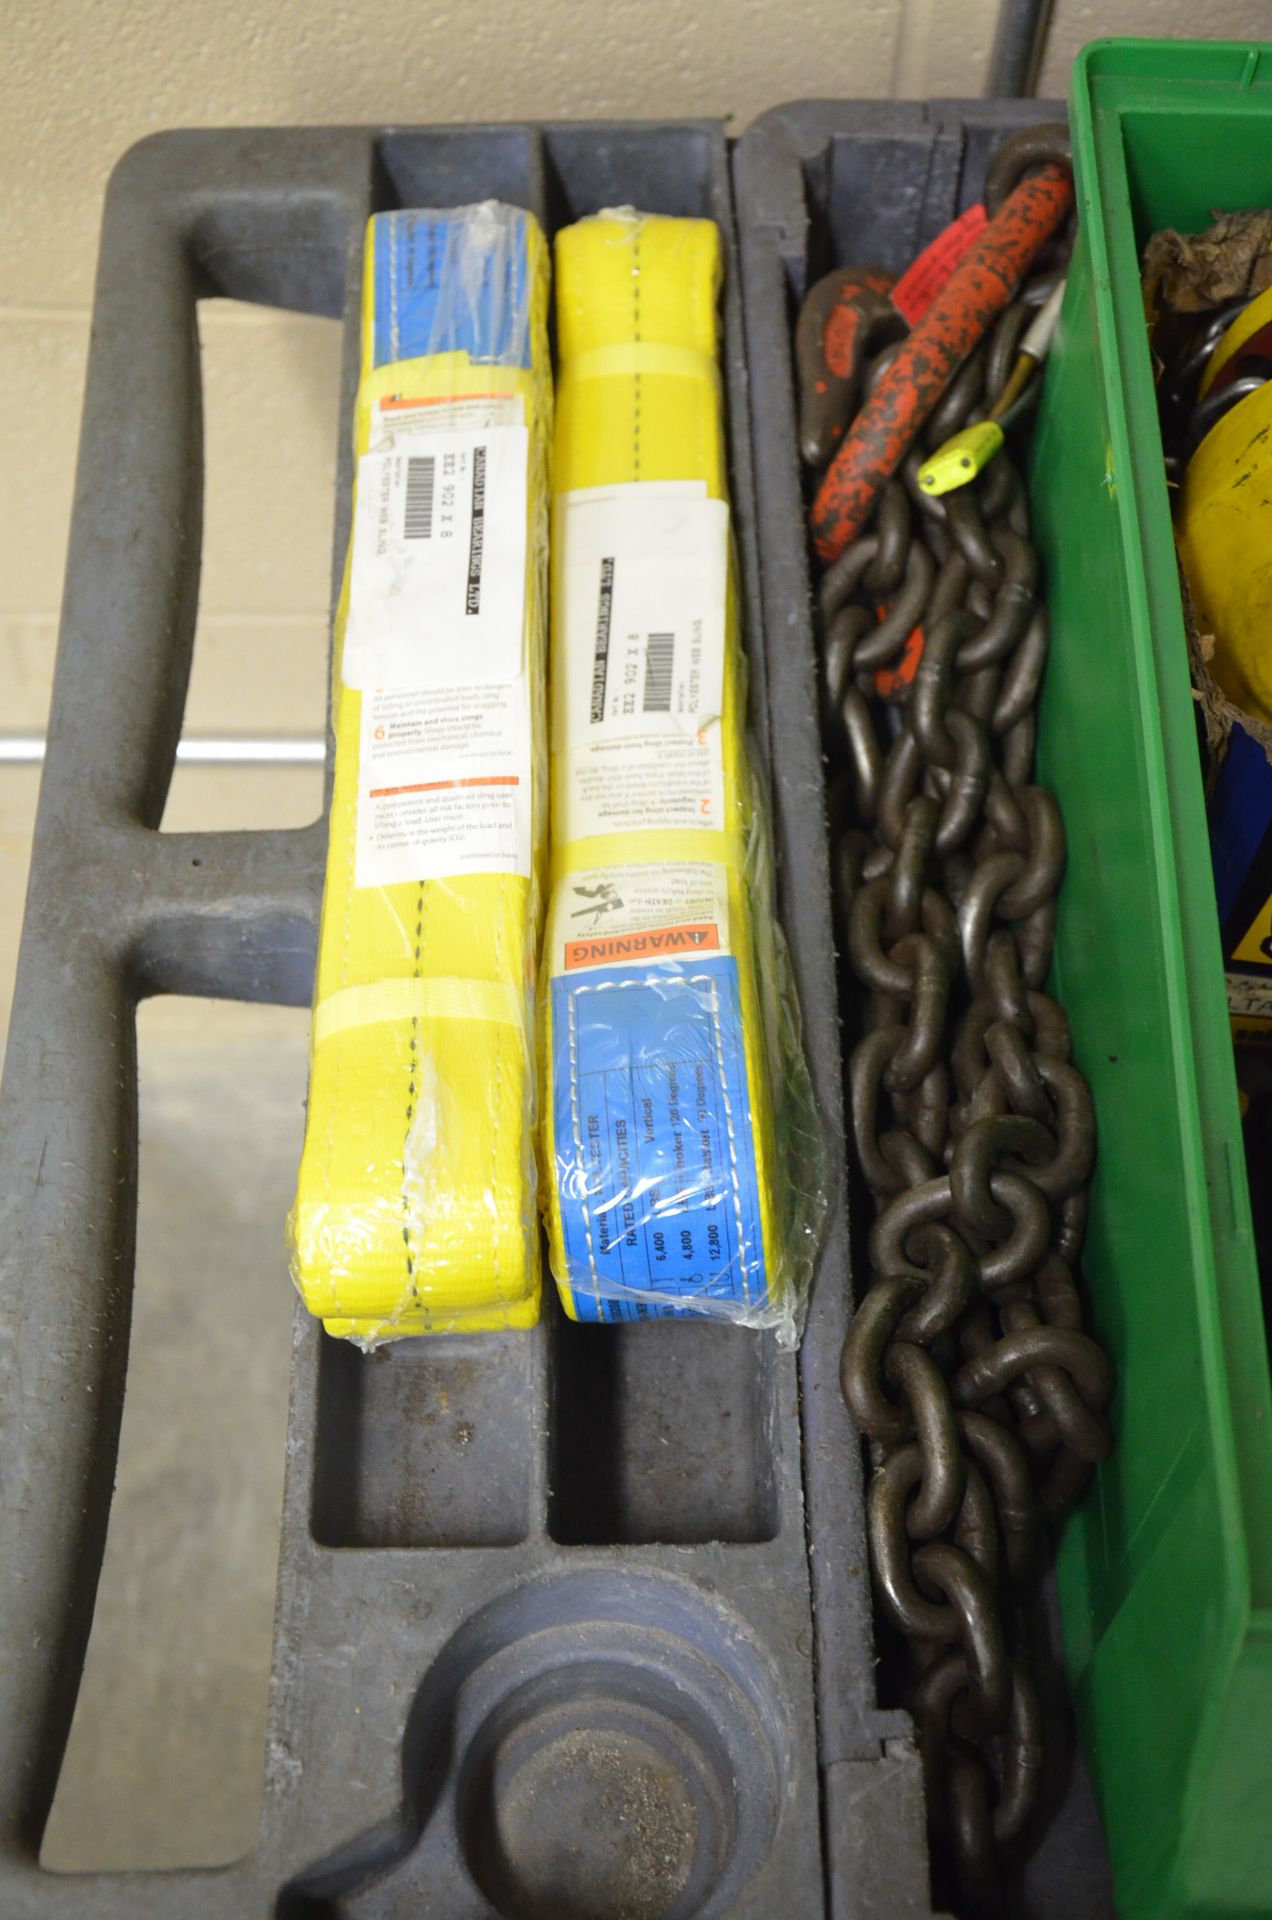 LOT/ (2) VGD 1-1/2 TON COME-A-LONGS, SHACKLES, EYE BOLTS, LIFTING SLINGS AND FALL ARREST HARNESSES - Image 6 of 7